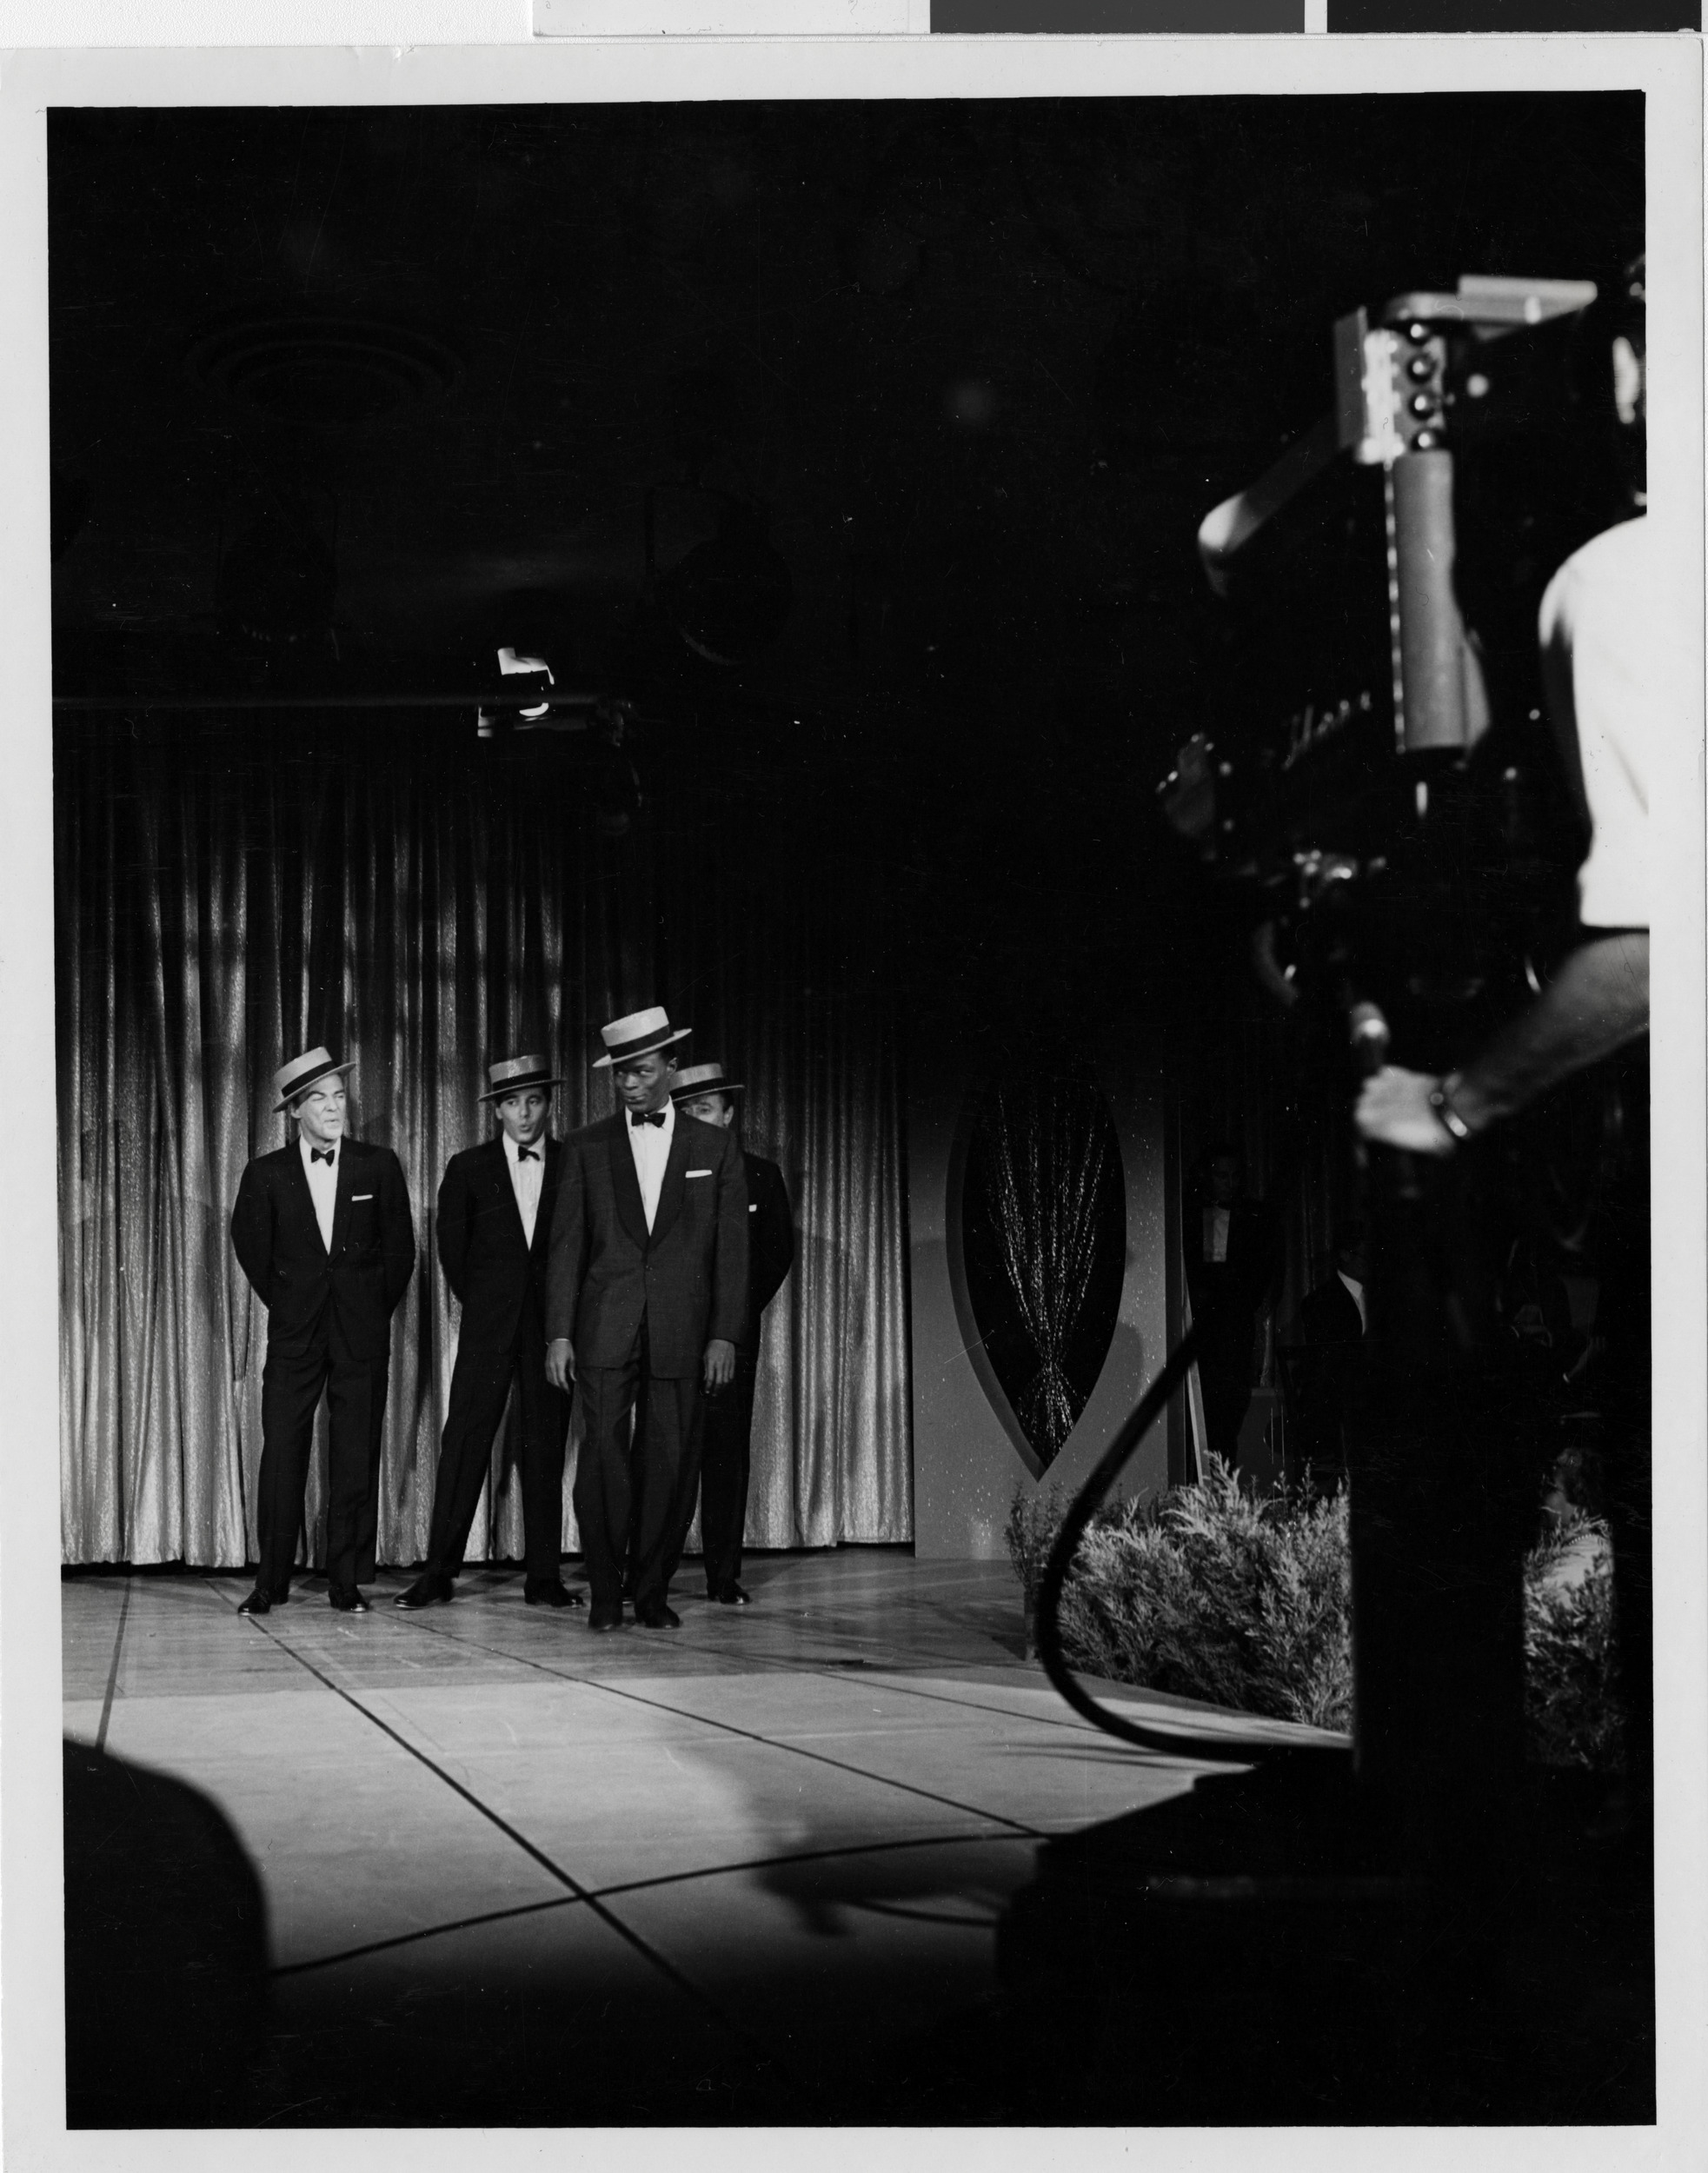 Cole onstage, image 001